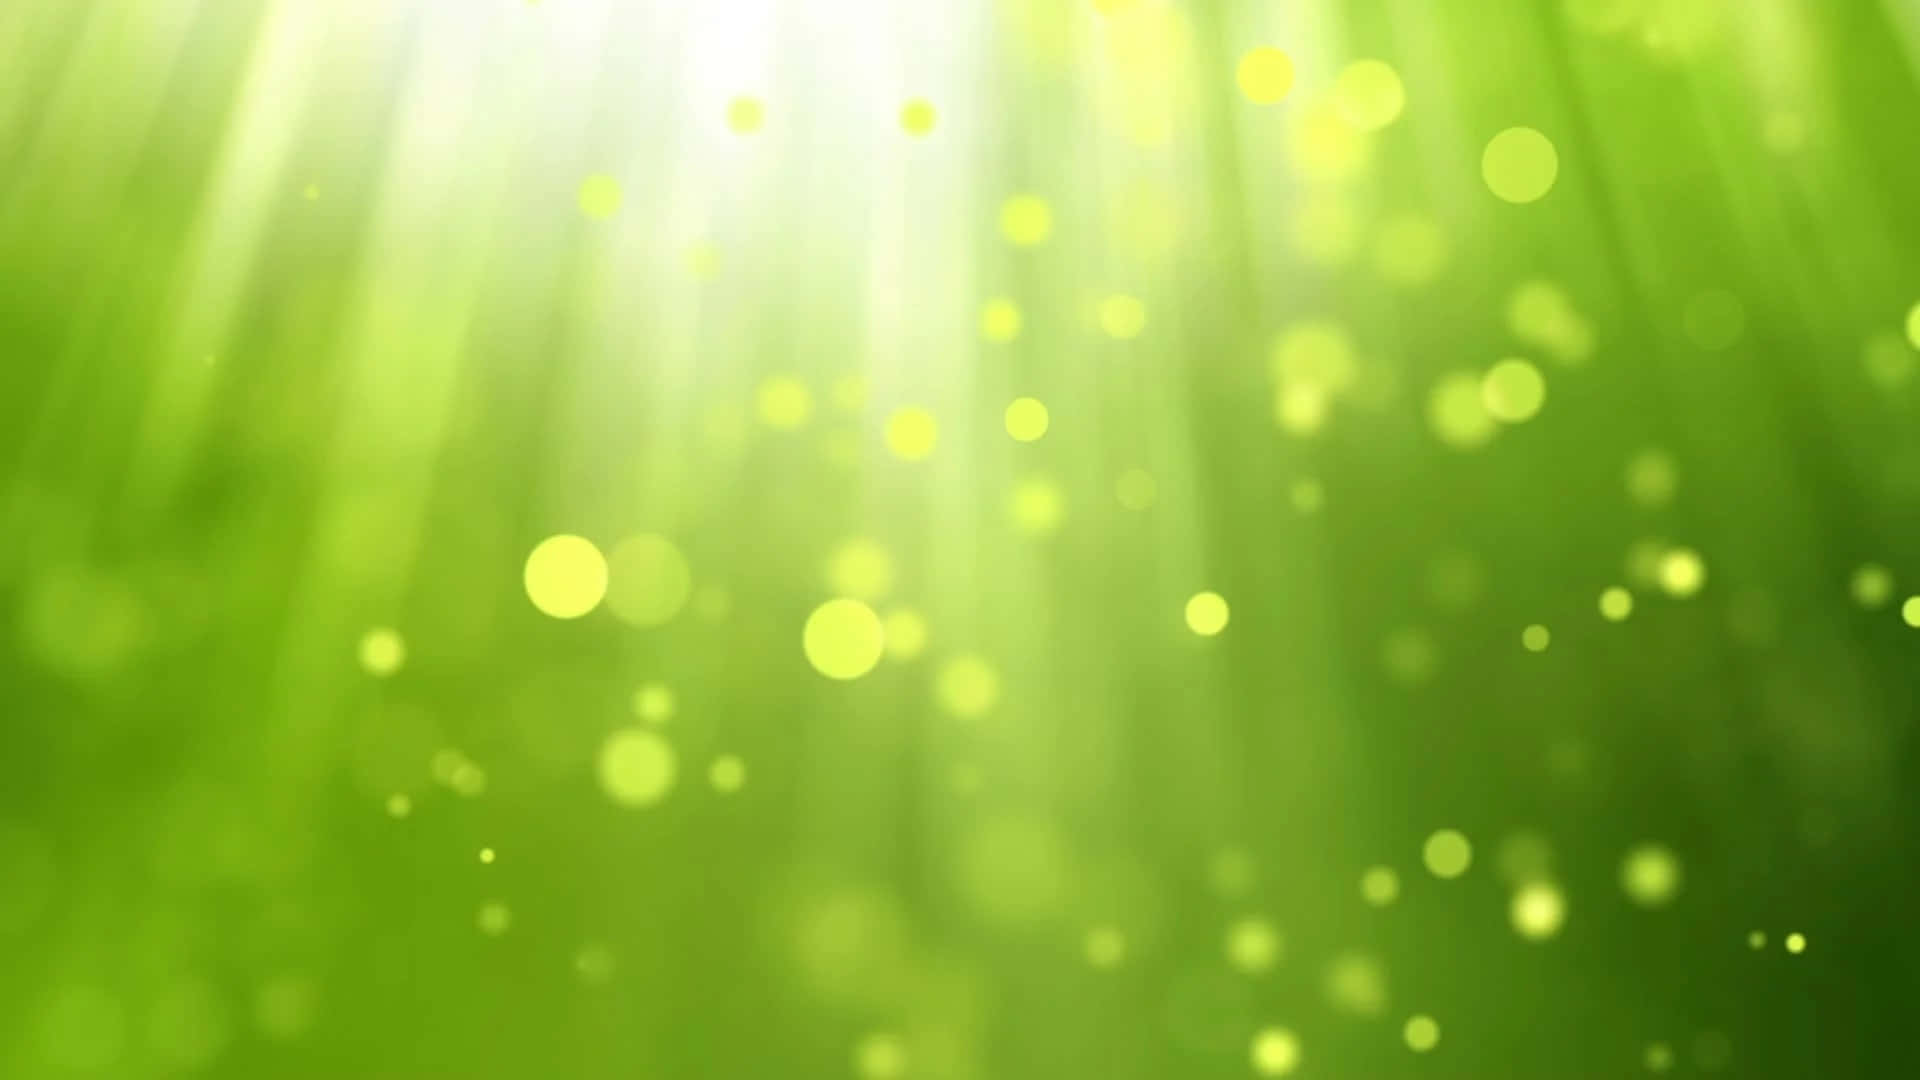 Light Rays And Bokeh In Light Green Background